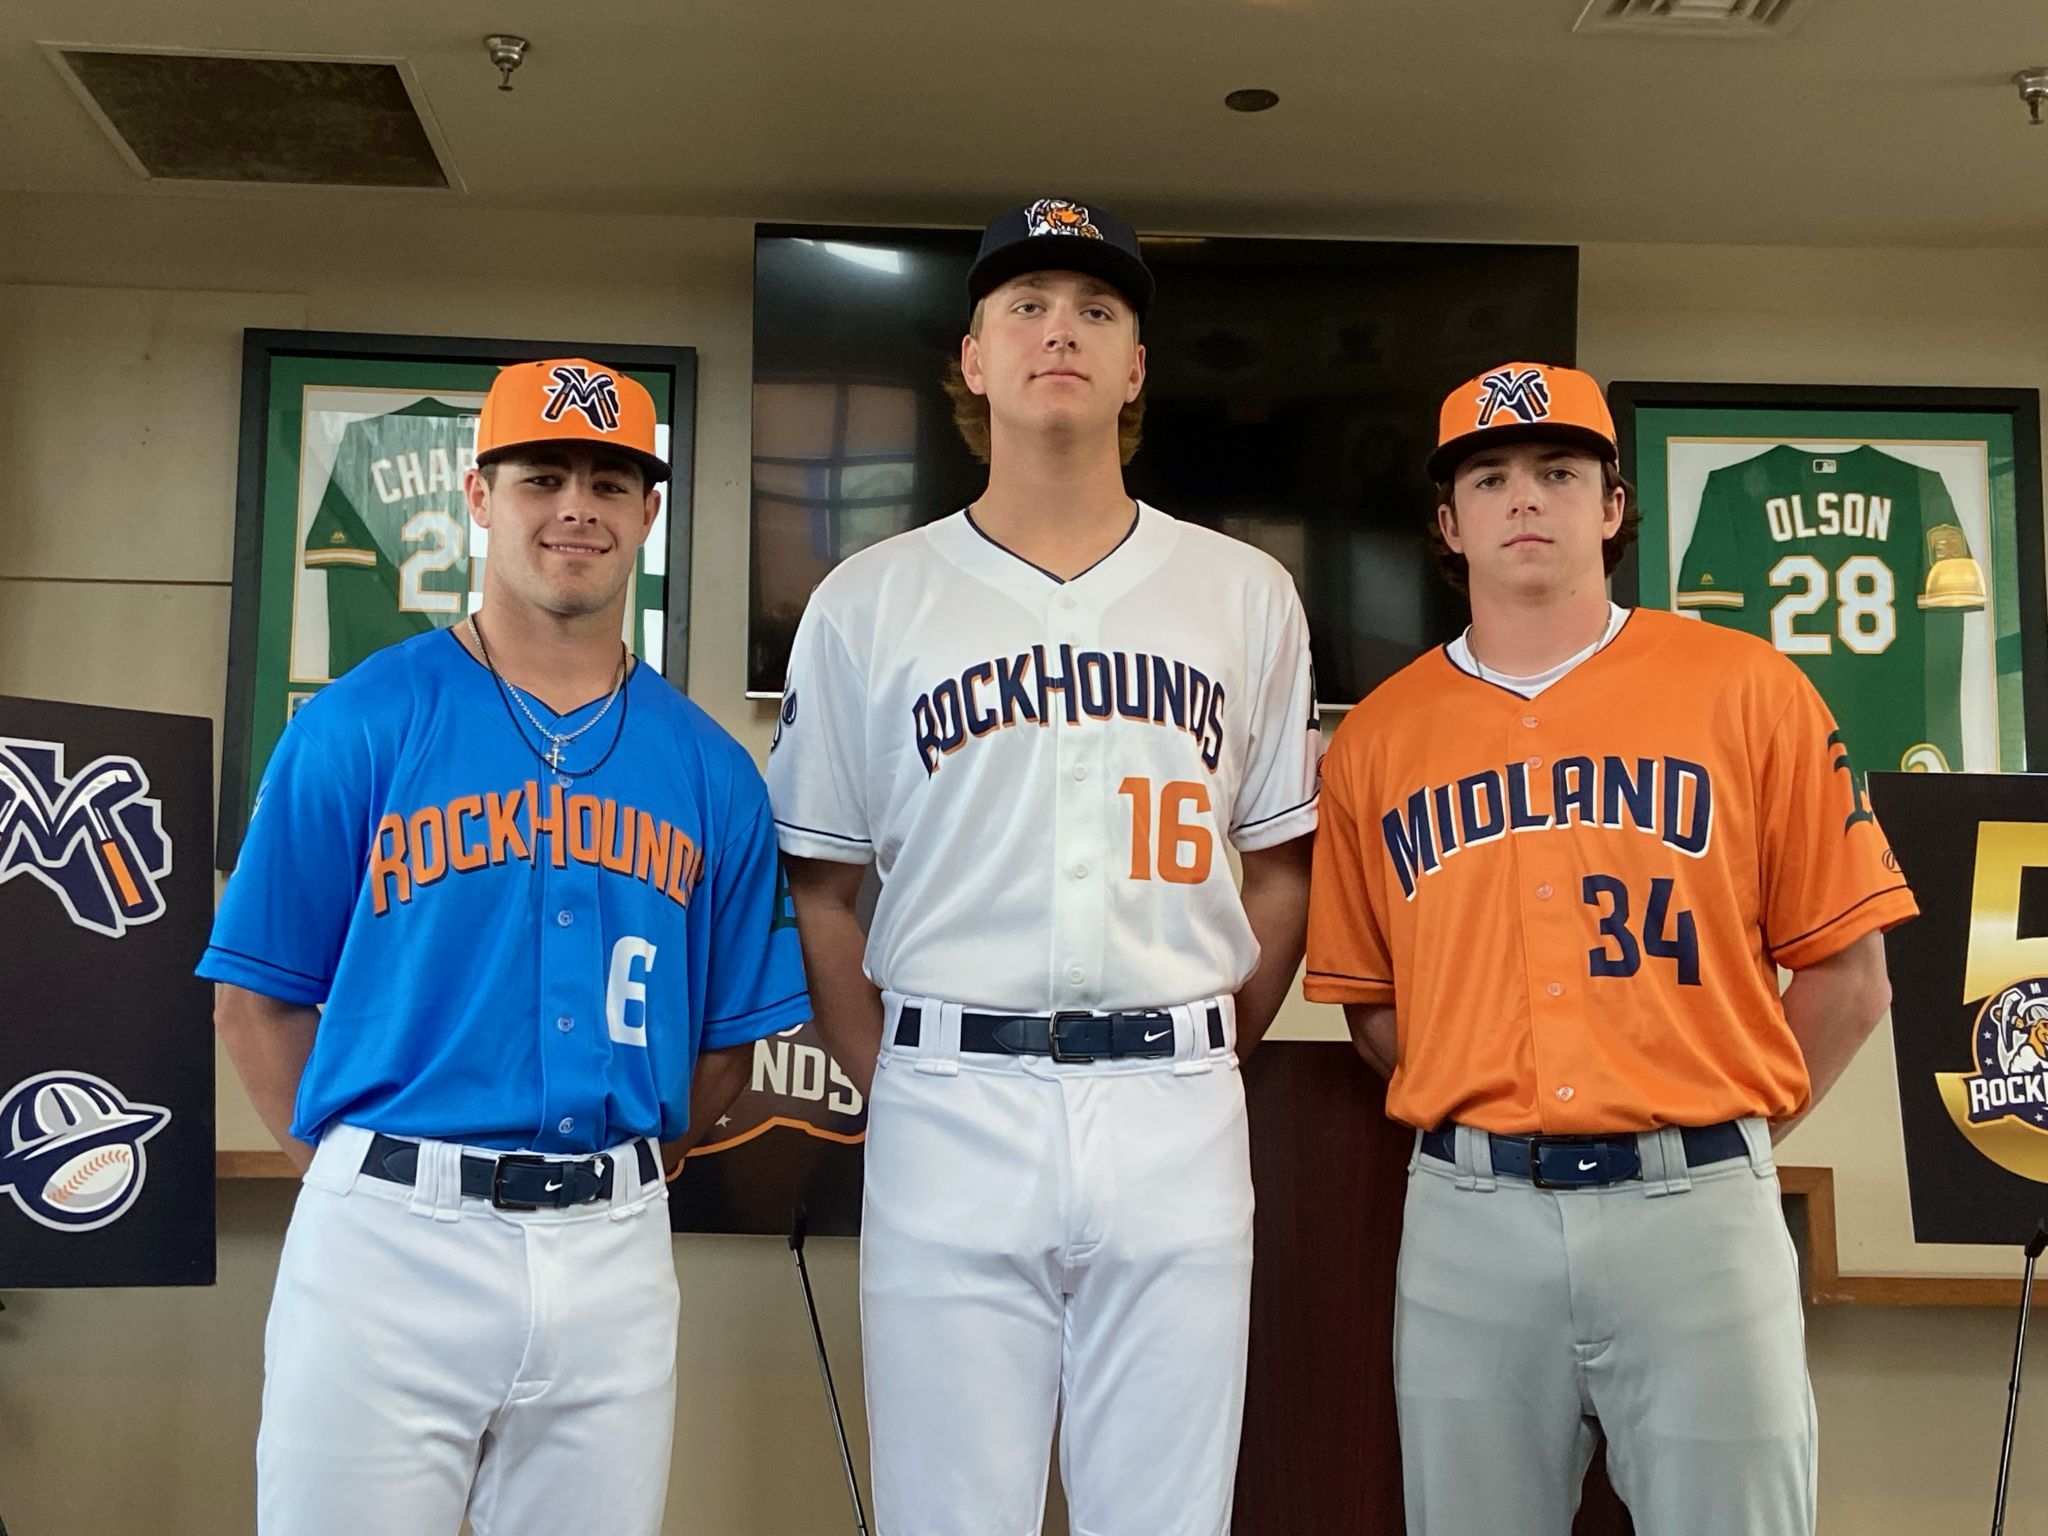 Corpus Christi's Whataburger uniforms can't keep RockHounds from